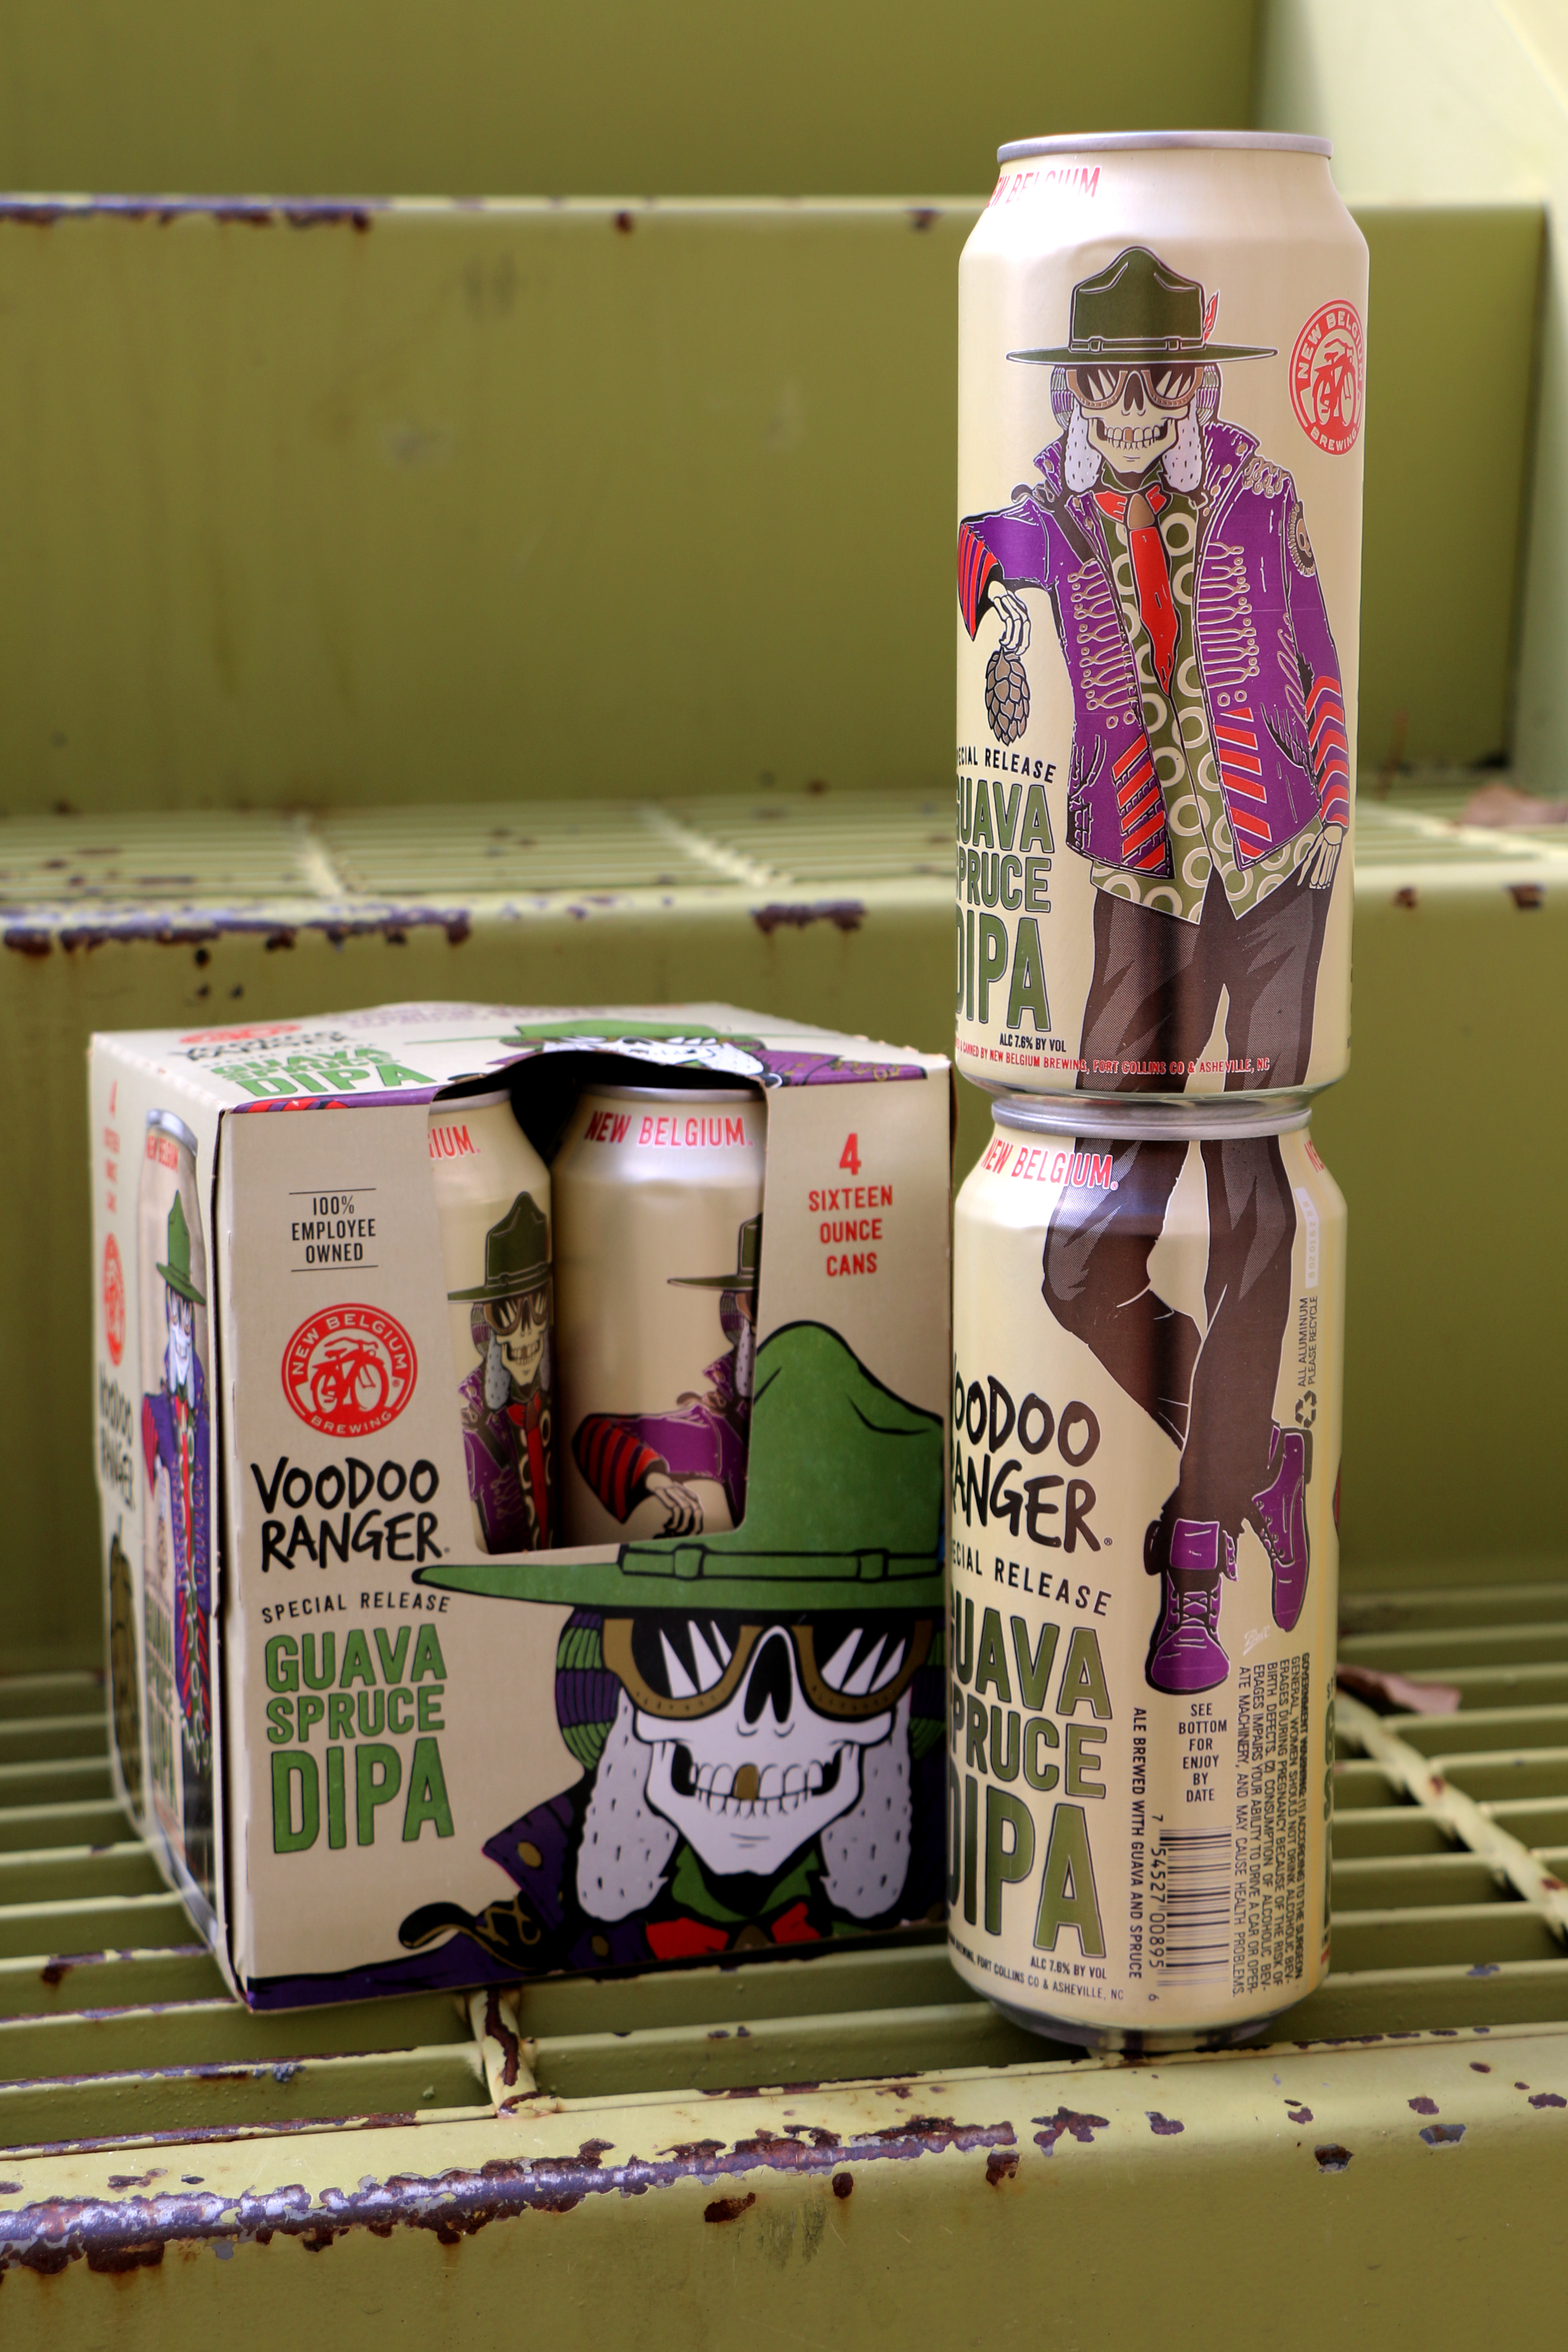 image of Guava Spruce DIPA courtesy of New Belgium Brewing